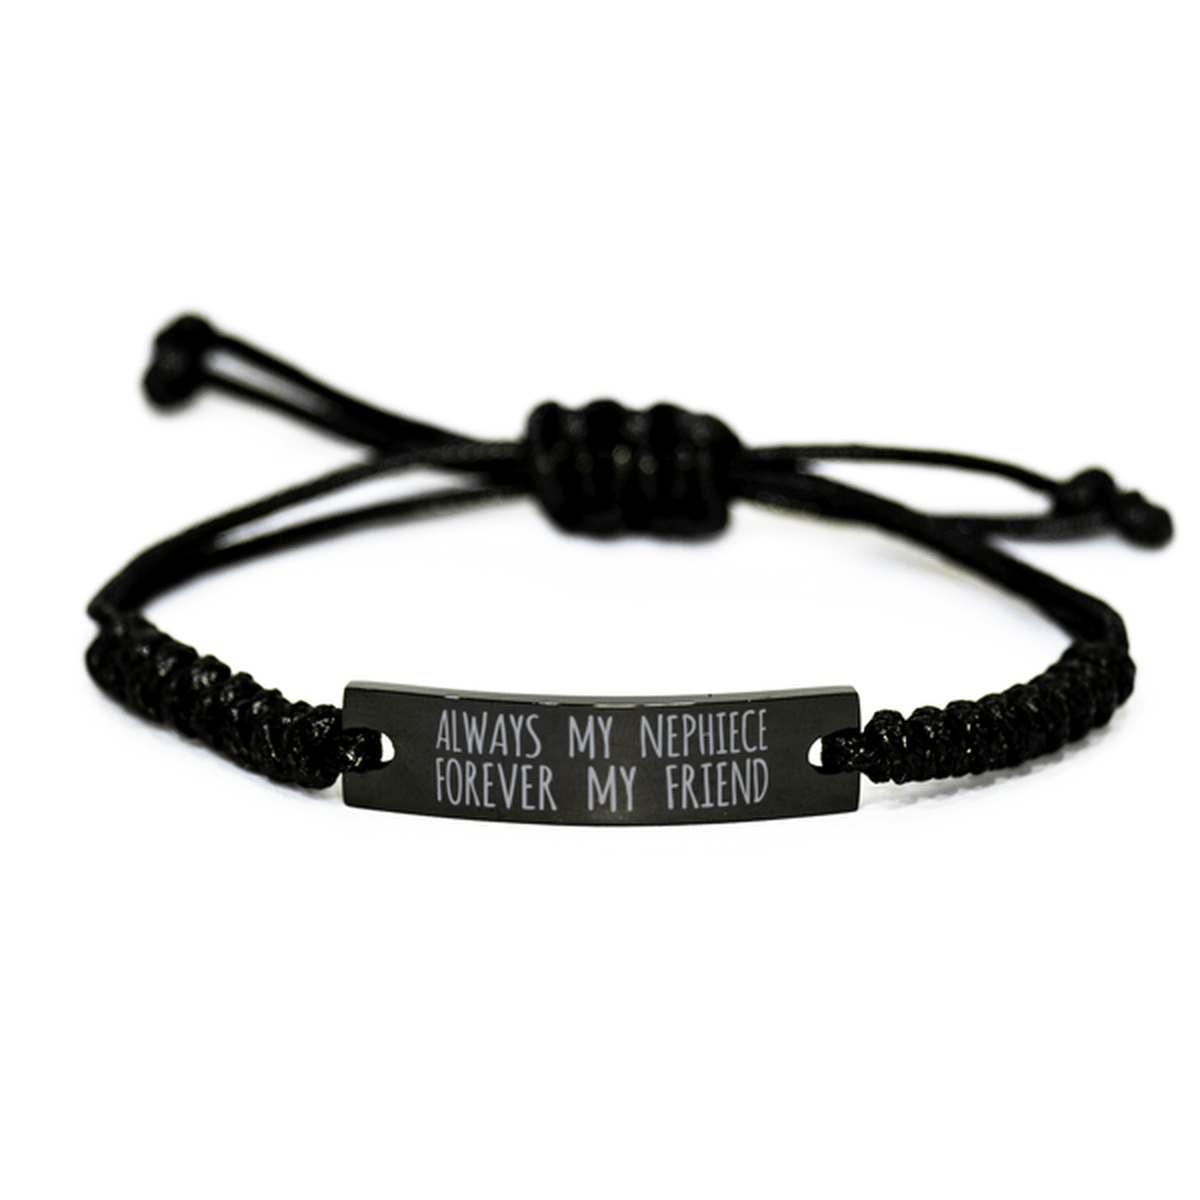 Inspirational Nephiece Black Rope Bracelet, Always My Nephiece Forever My Friend, Best Birthday Gifts For Family